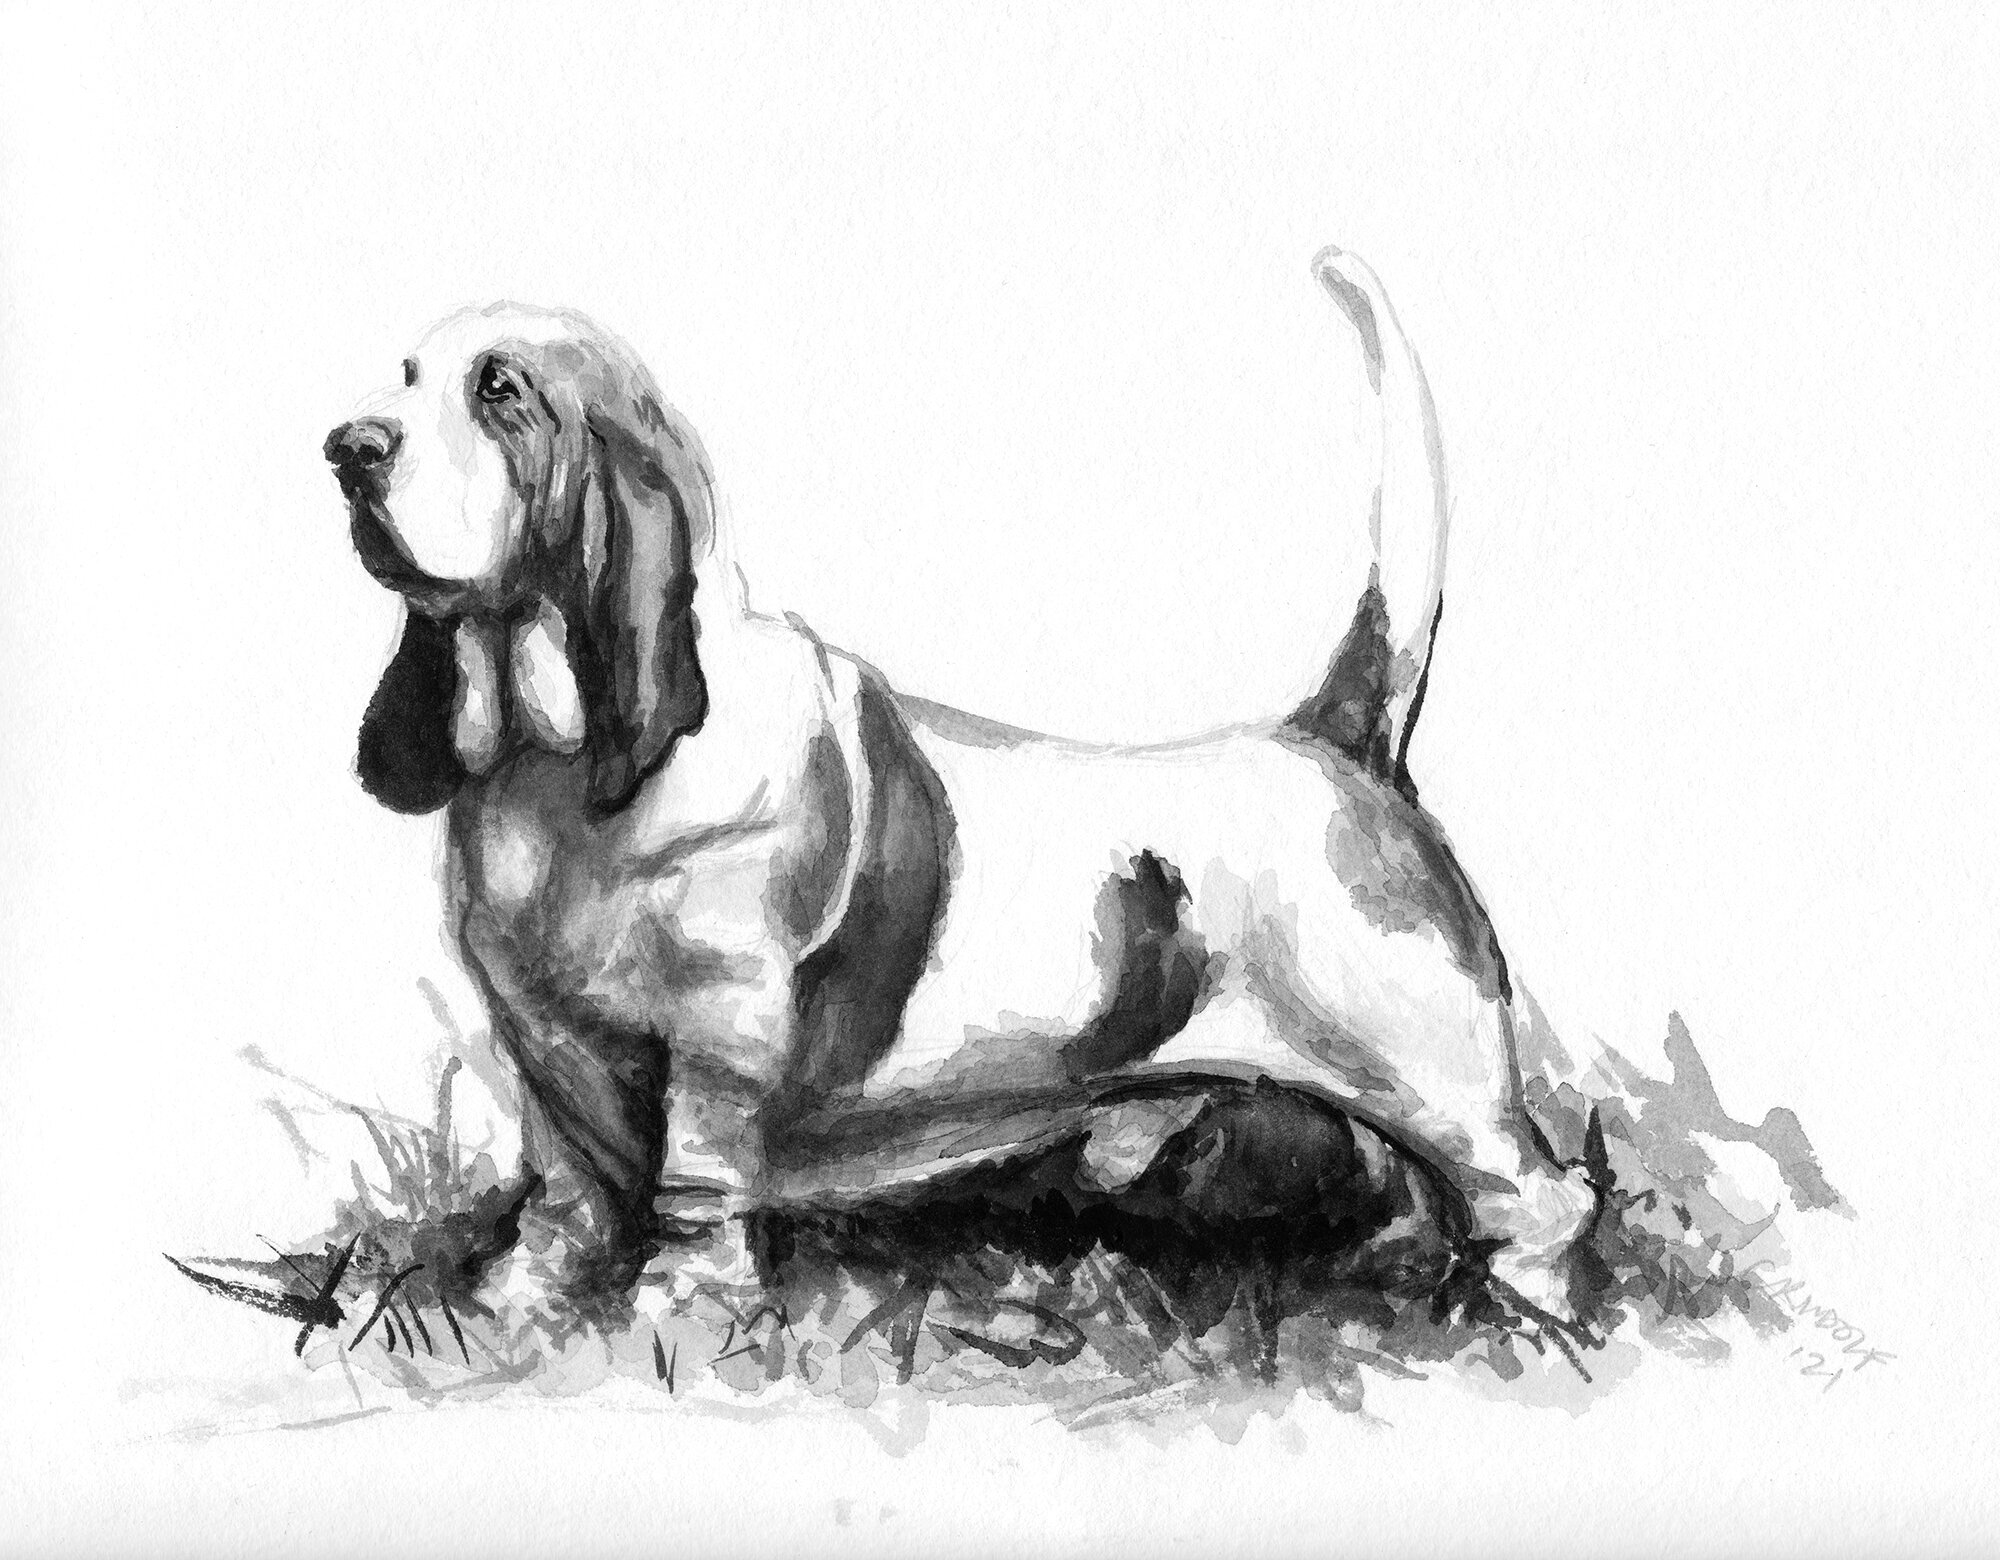 Basset Hound, from the breeds series